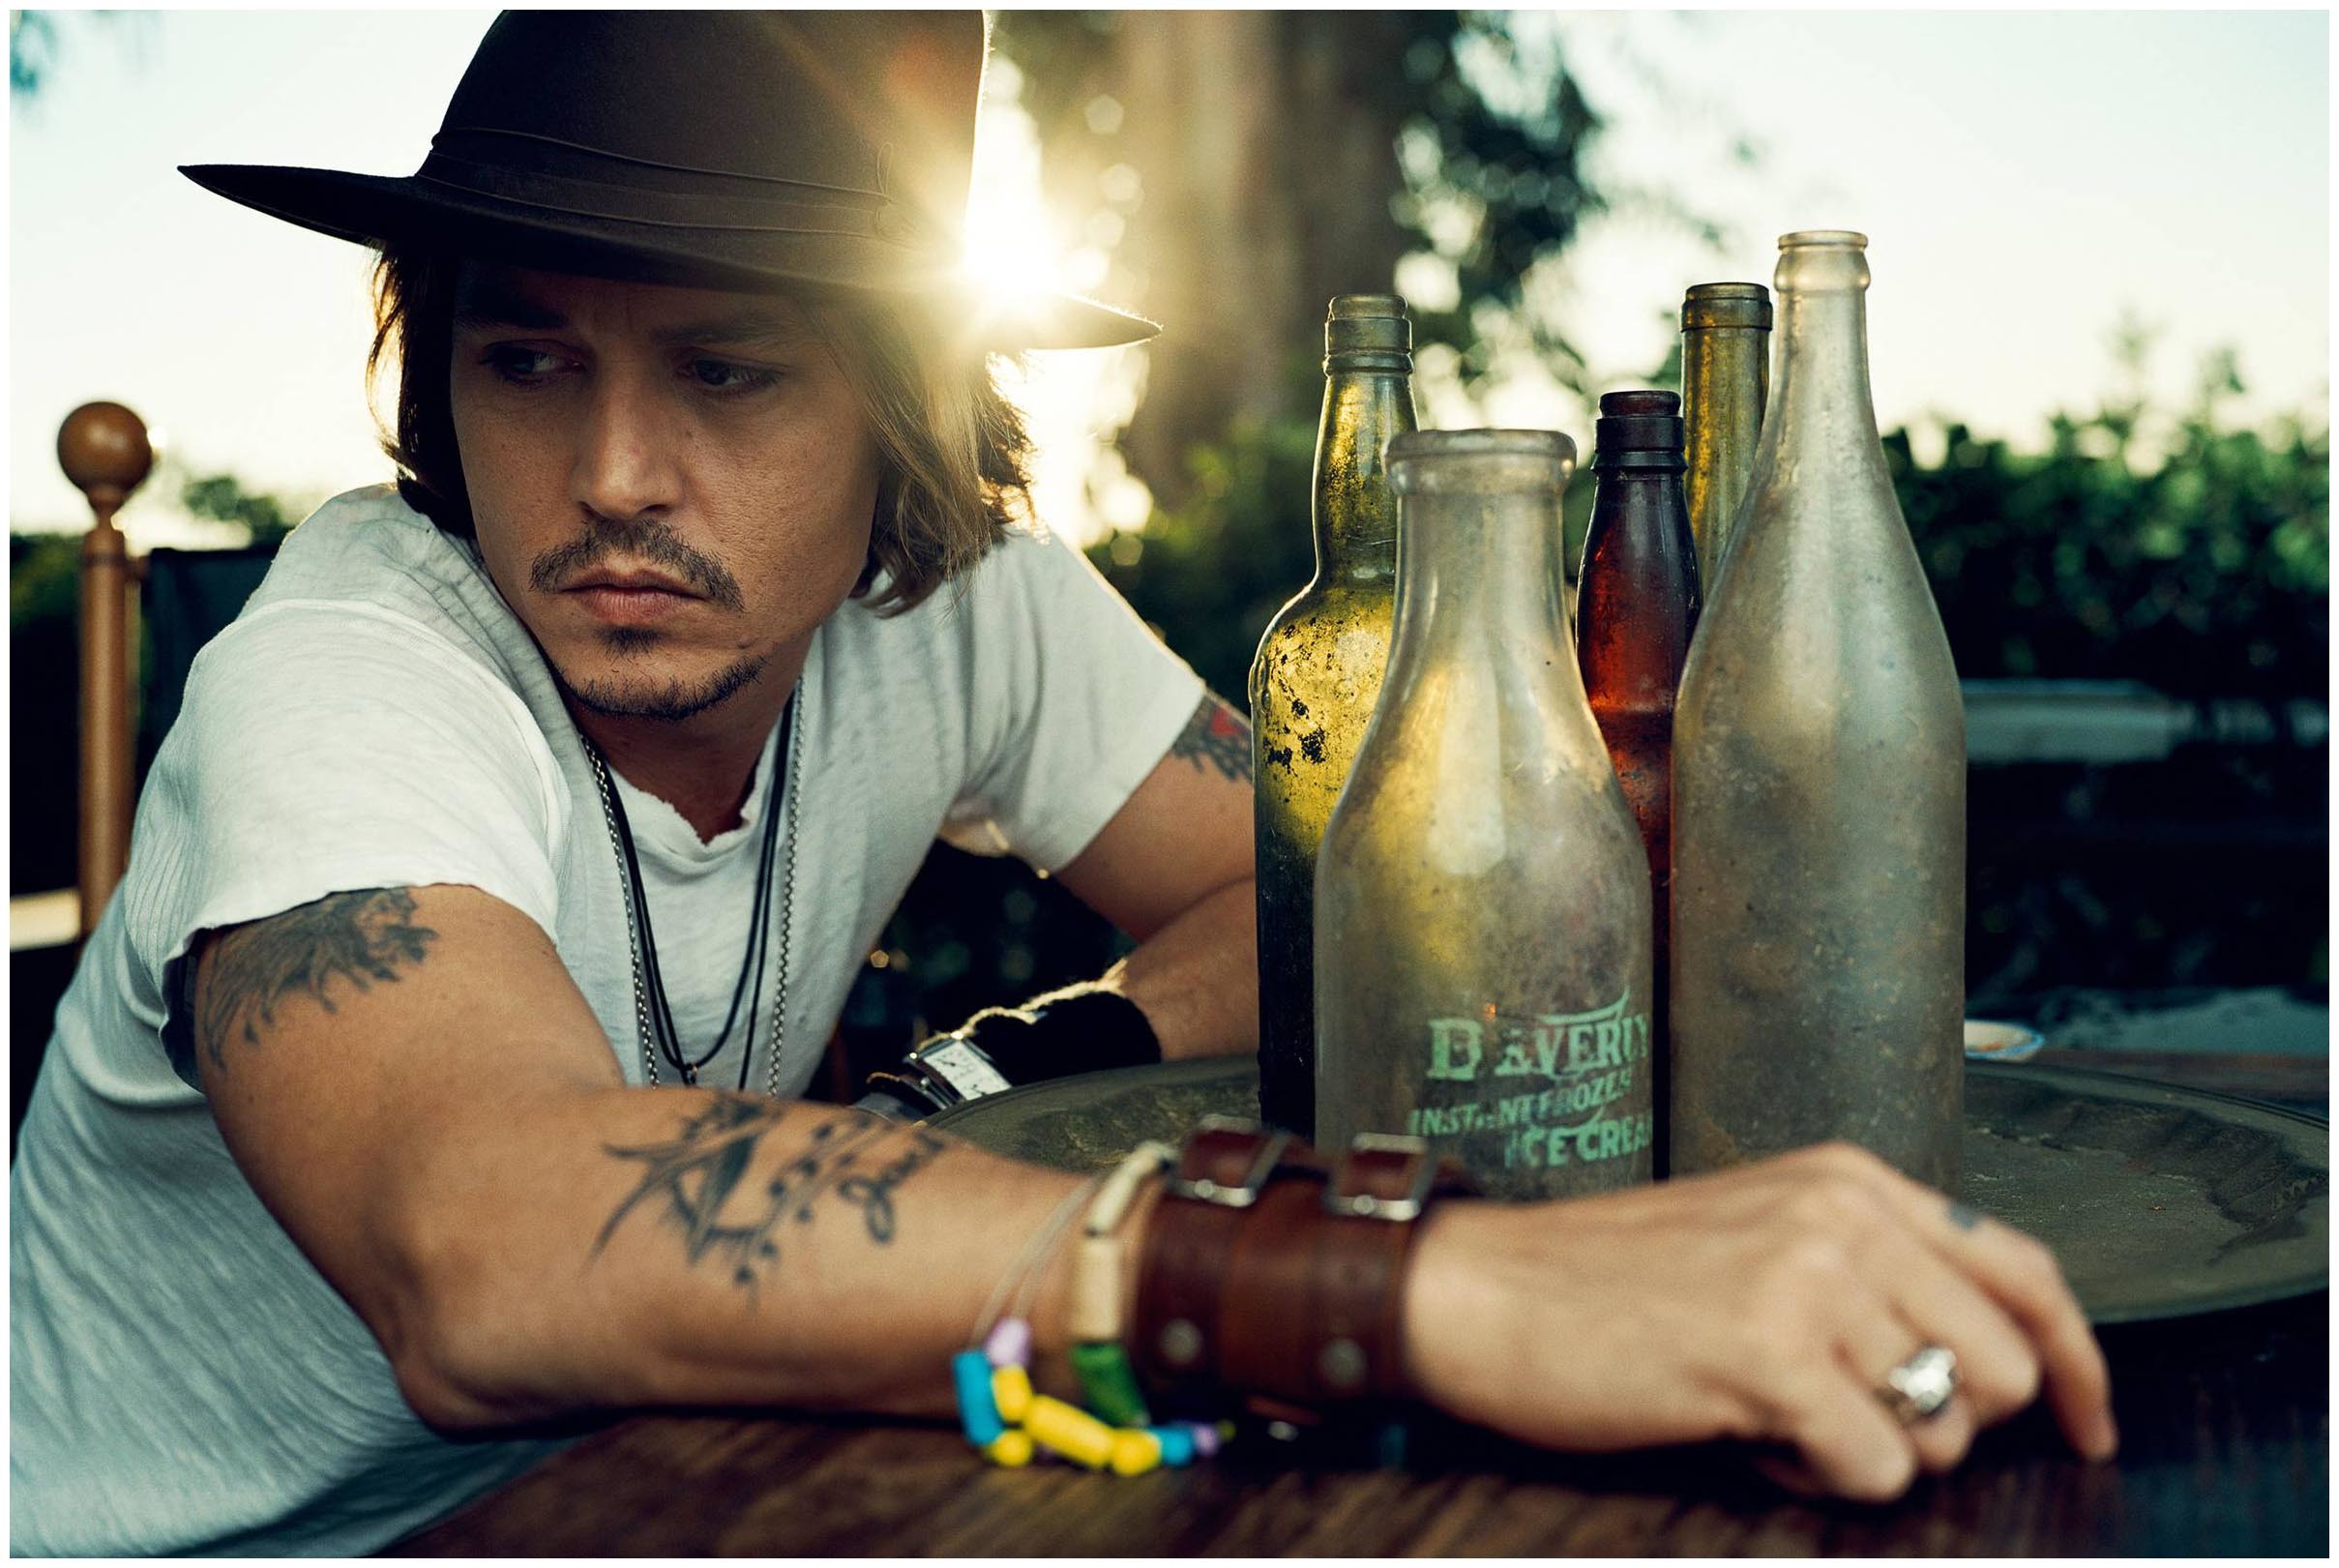 Johnny Depp Wallpapers (70+ pictures)